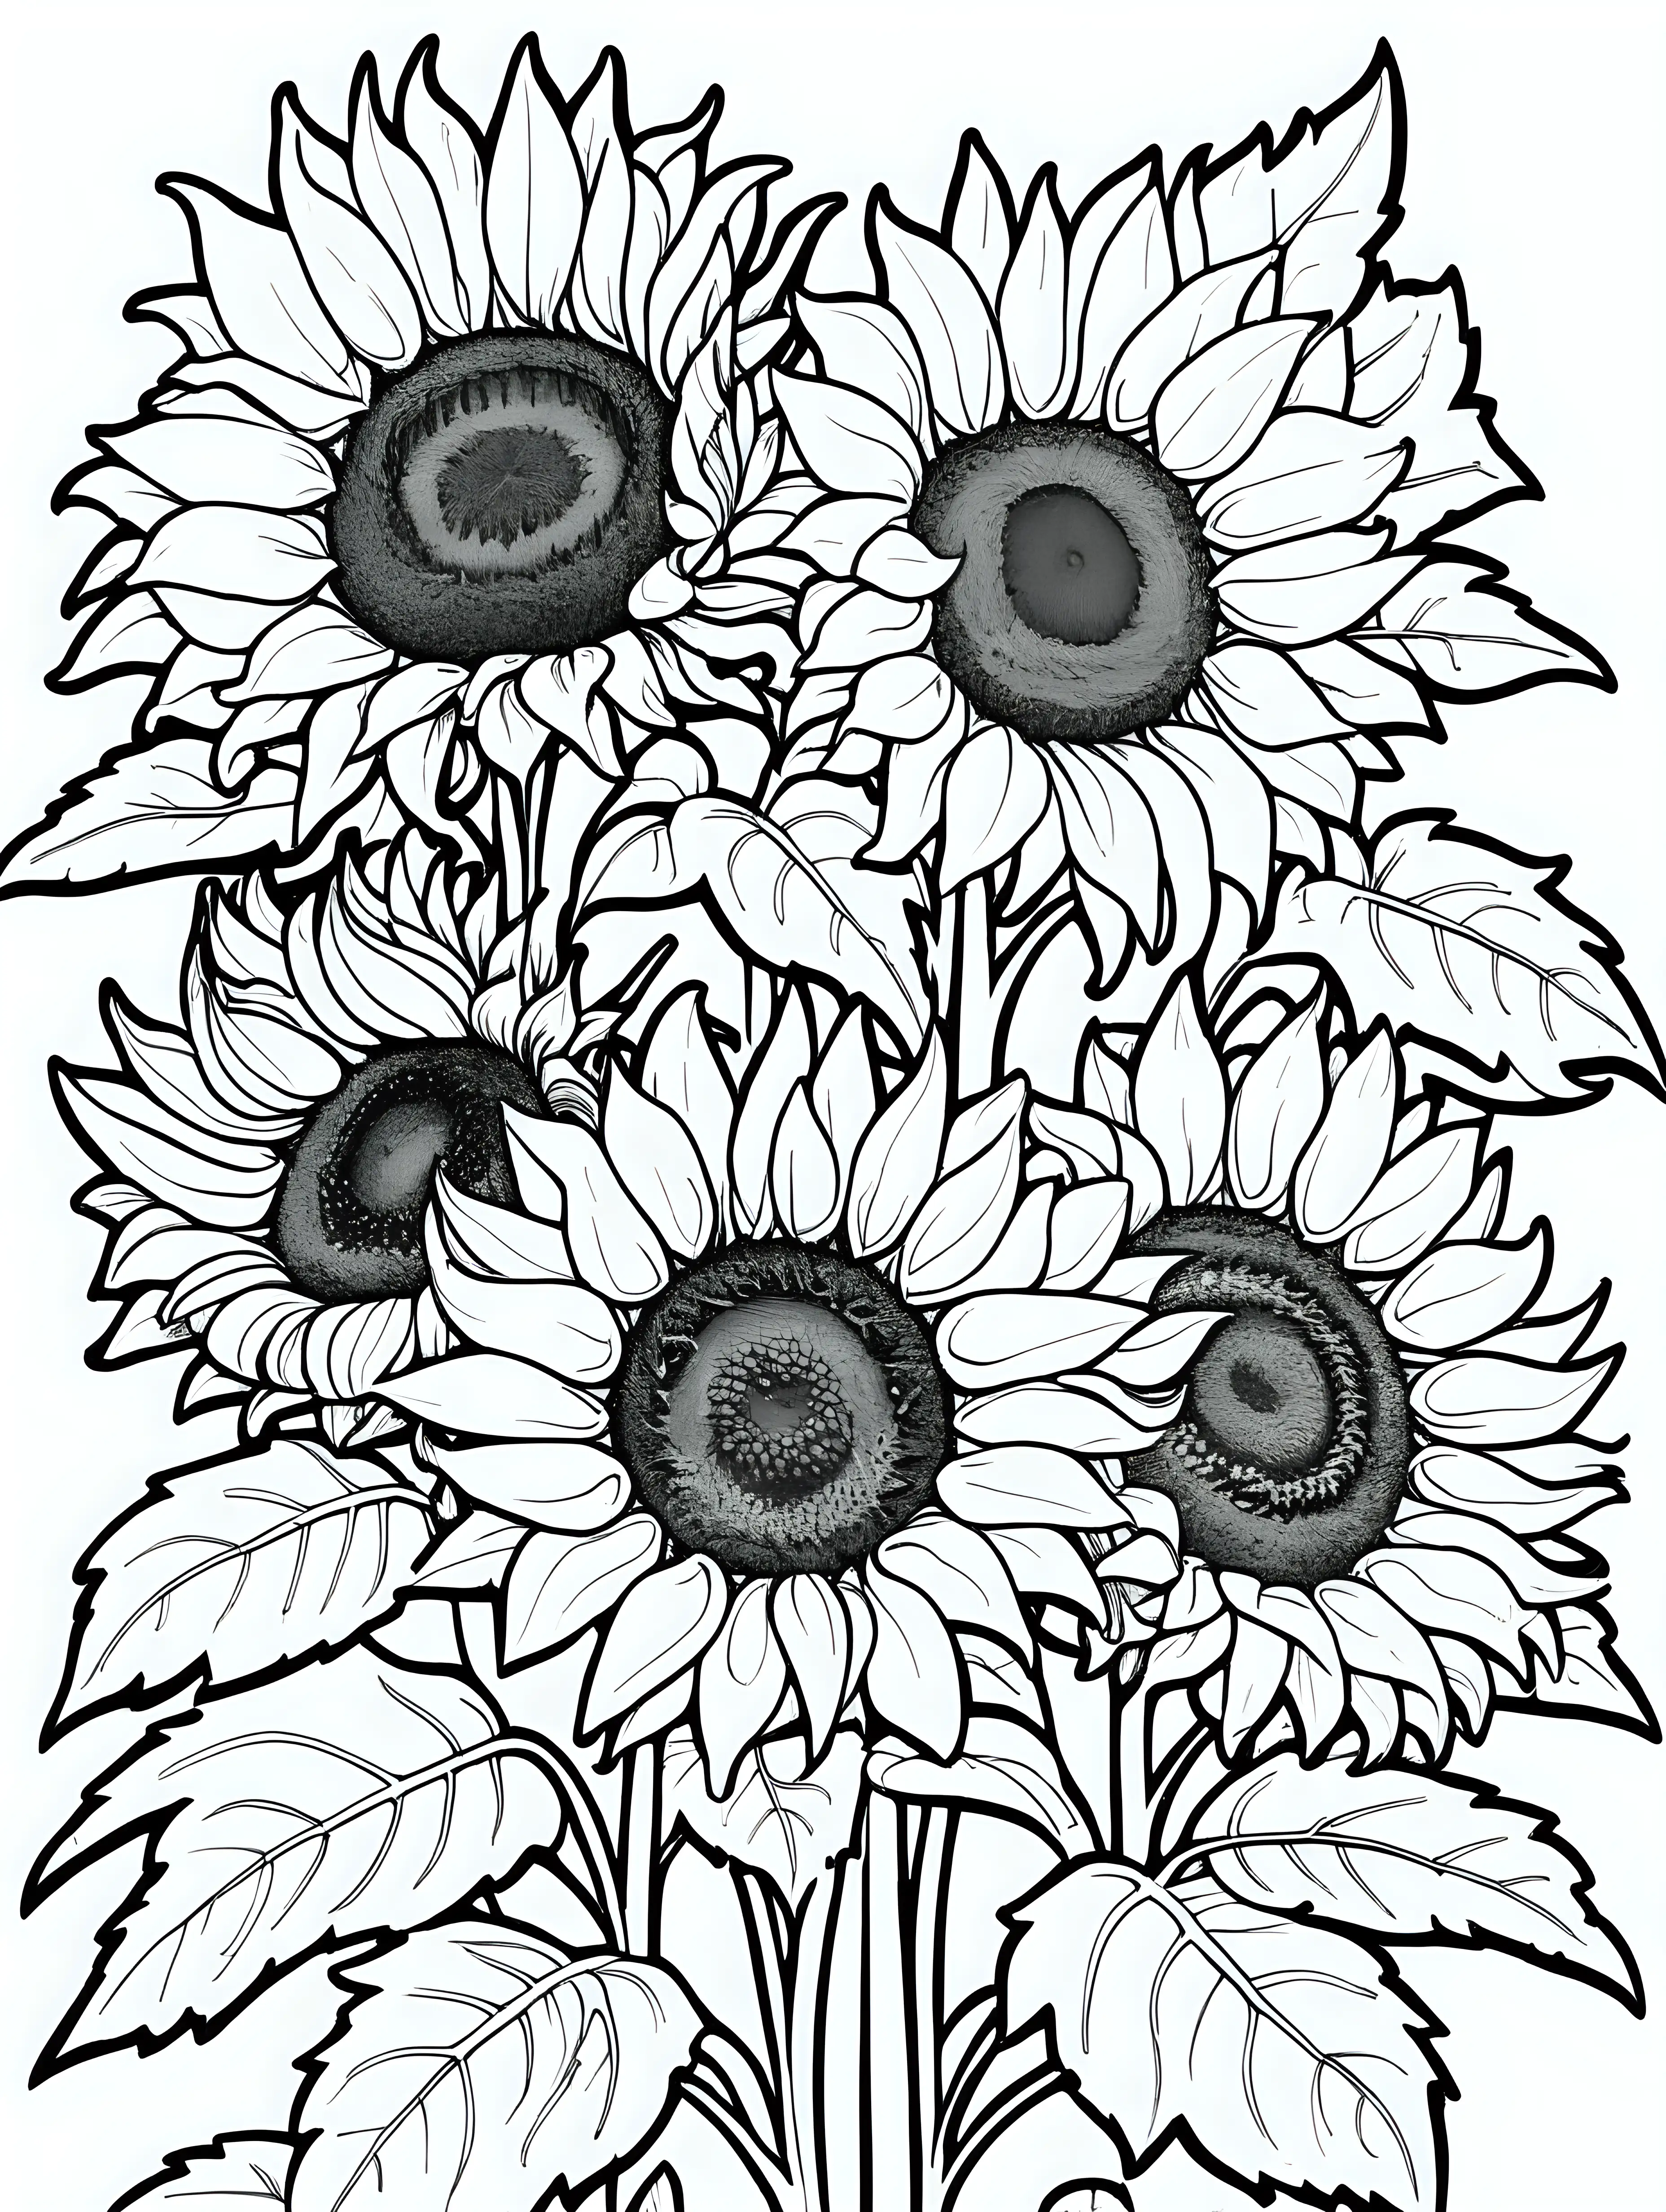 Cartoon Style Sunflower Coloring Page